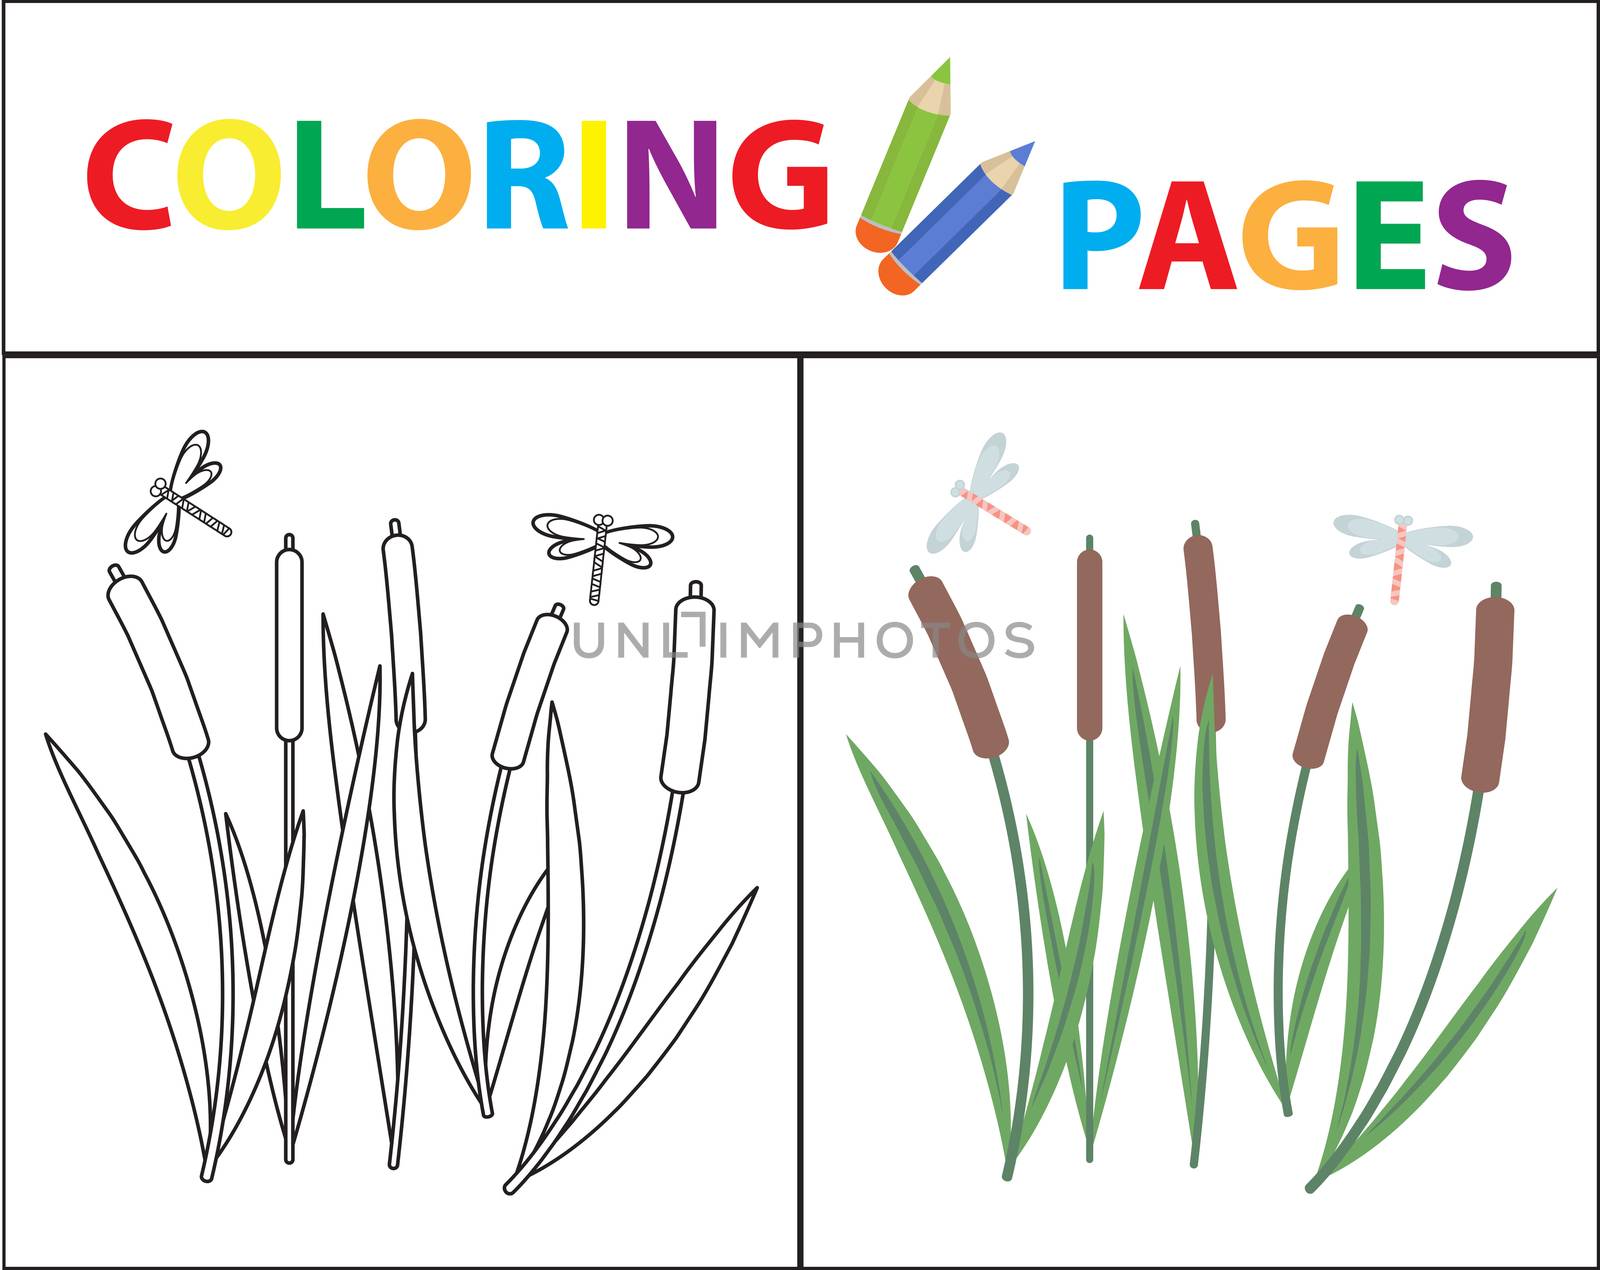 Coloring book page for kids. Reeds and dragonflies. Sketch outline and color version. Childrens education. illustration